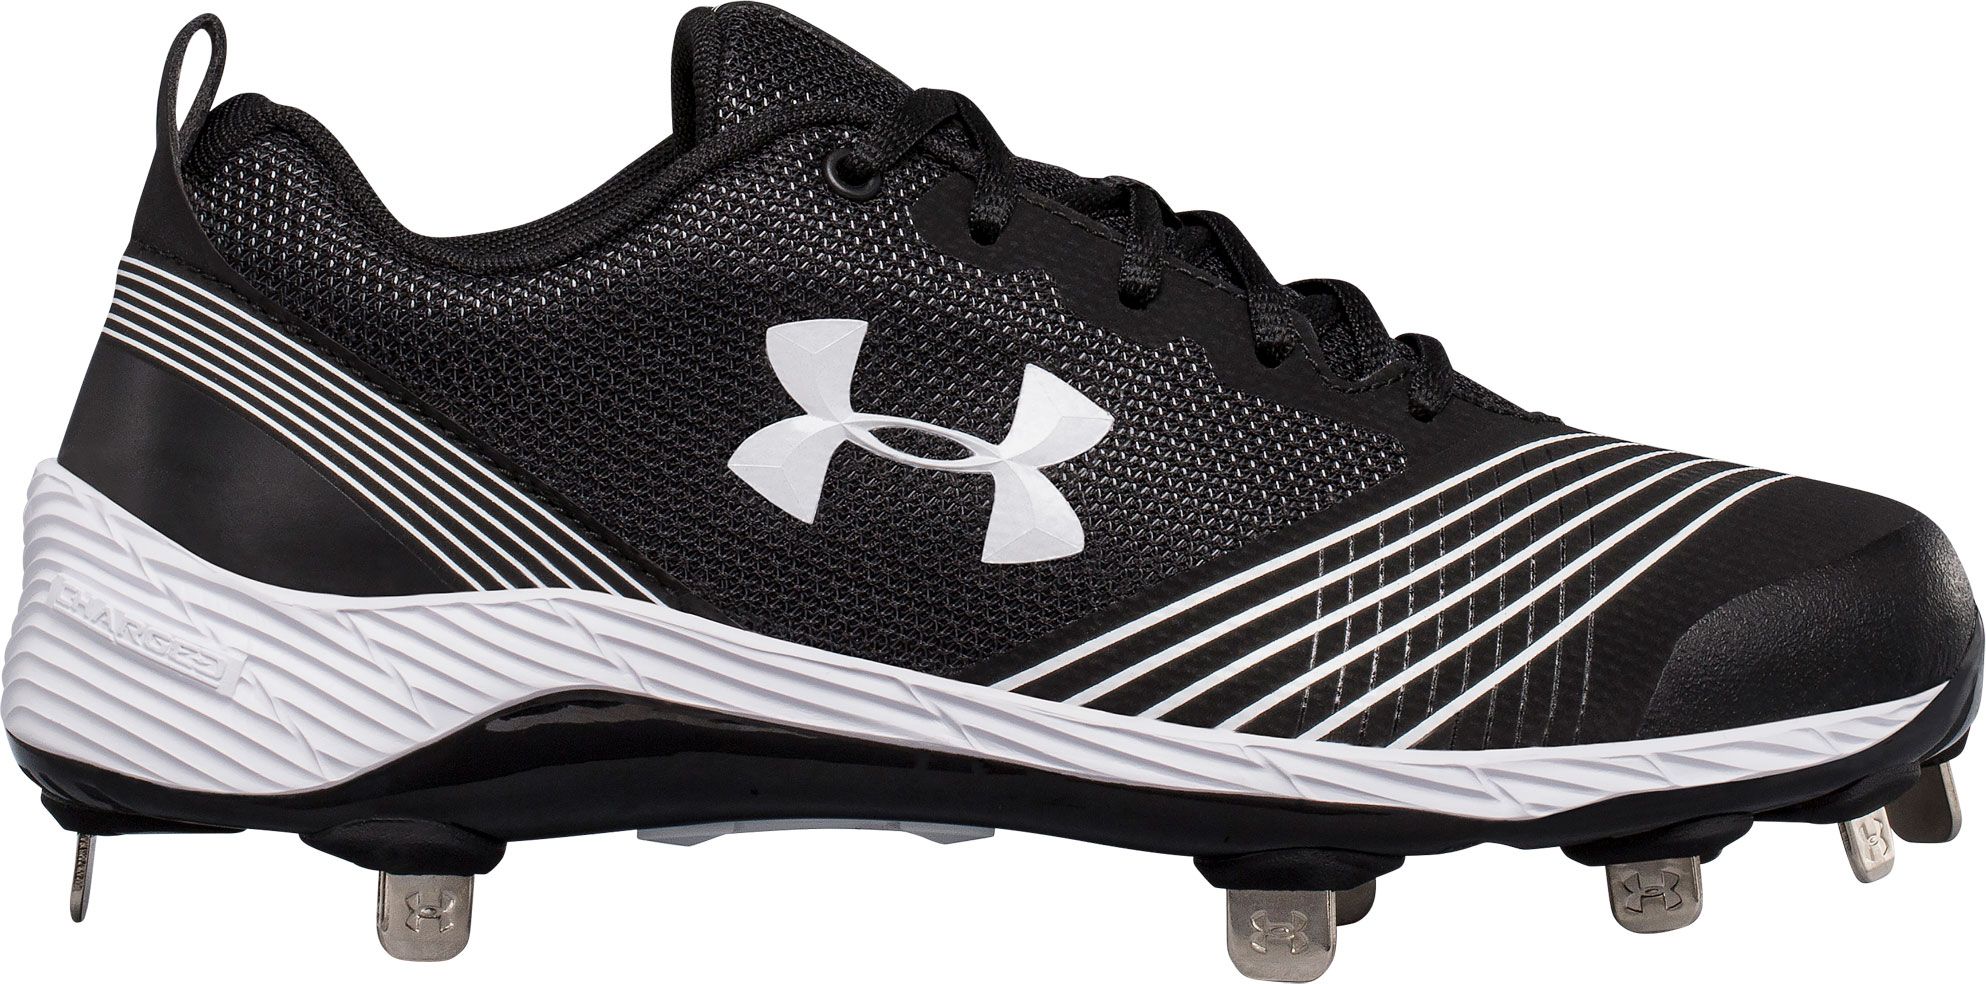 fastpitch softball shoes